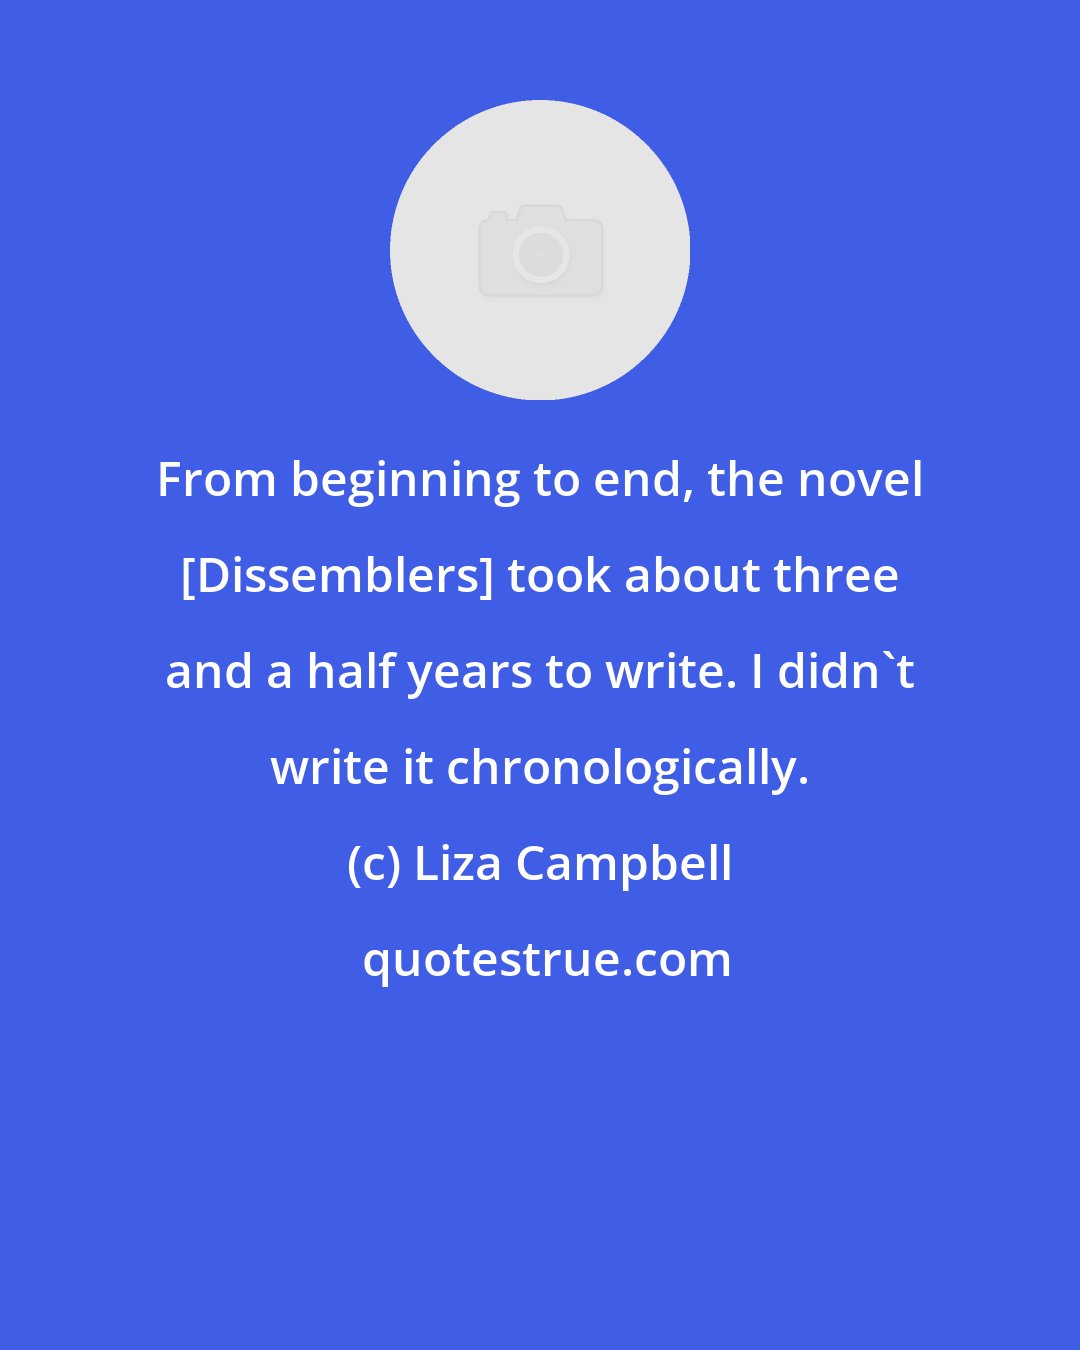 Liza Campbell: From beginning to end, the novel [Dissemblers] took about three and a half years to write. I didn't write it chronologically.